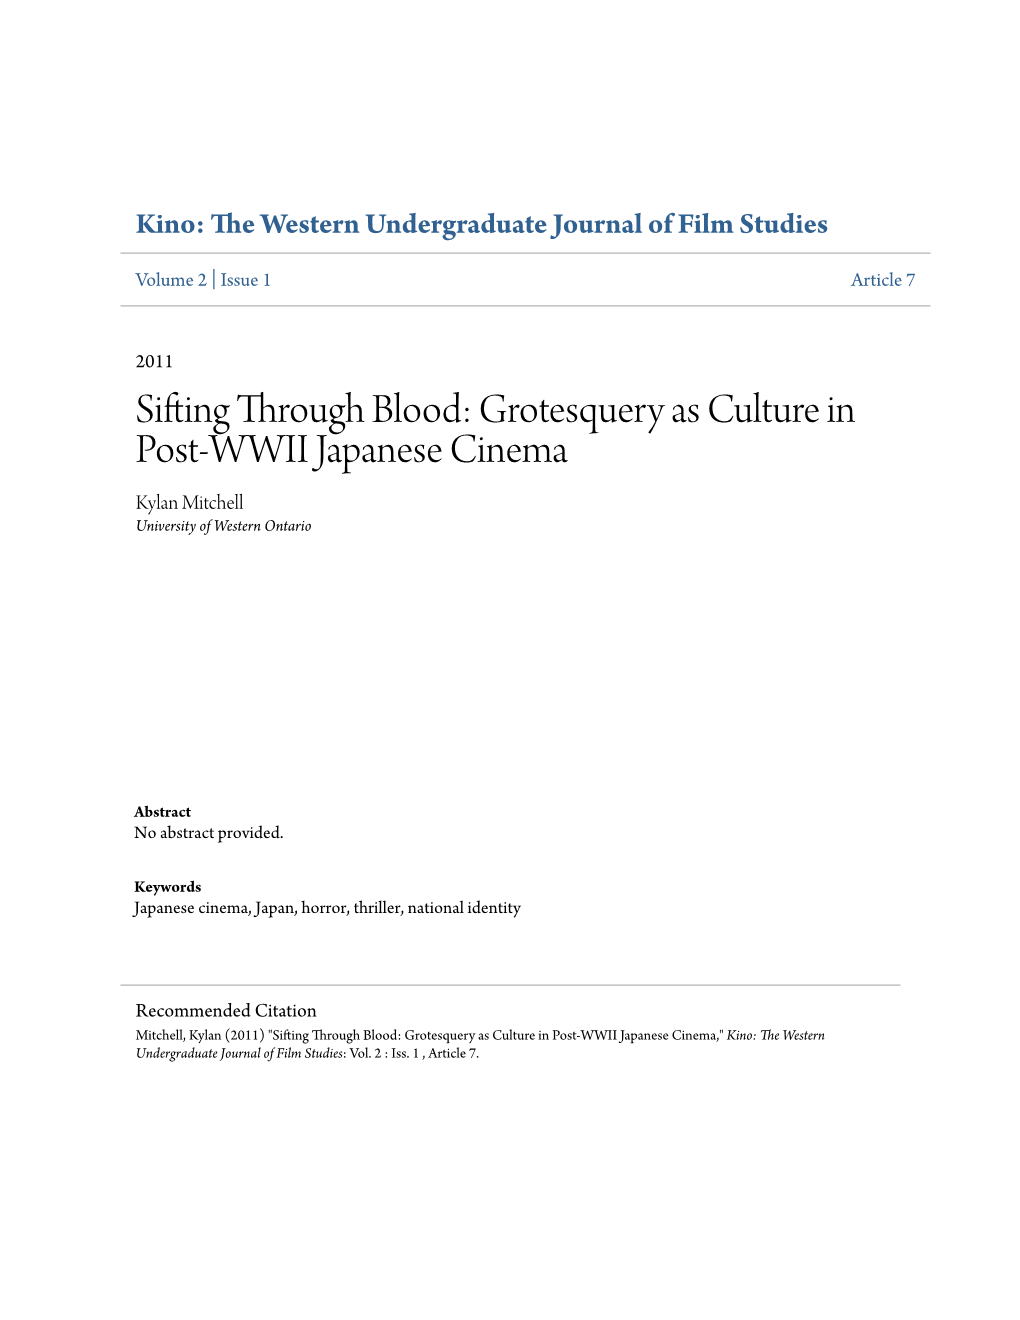 Sifting Through Blood: Grotesquery As Culture in Post-WWII Japanese Cinema Kylan Mitchell University of Western Ontario